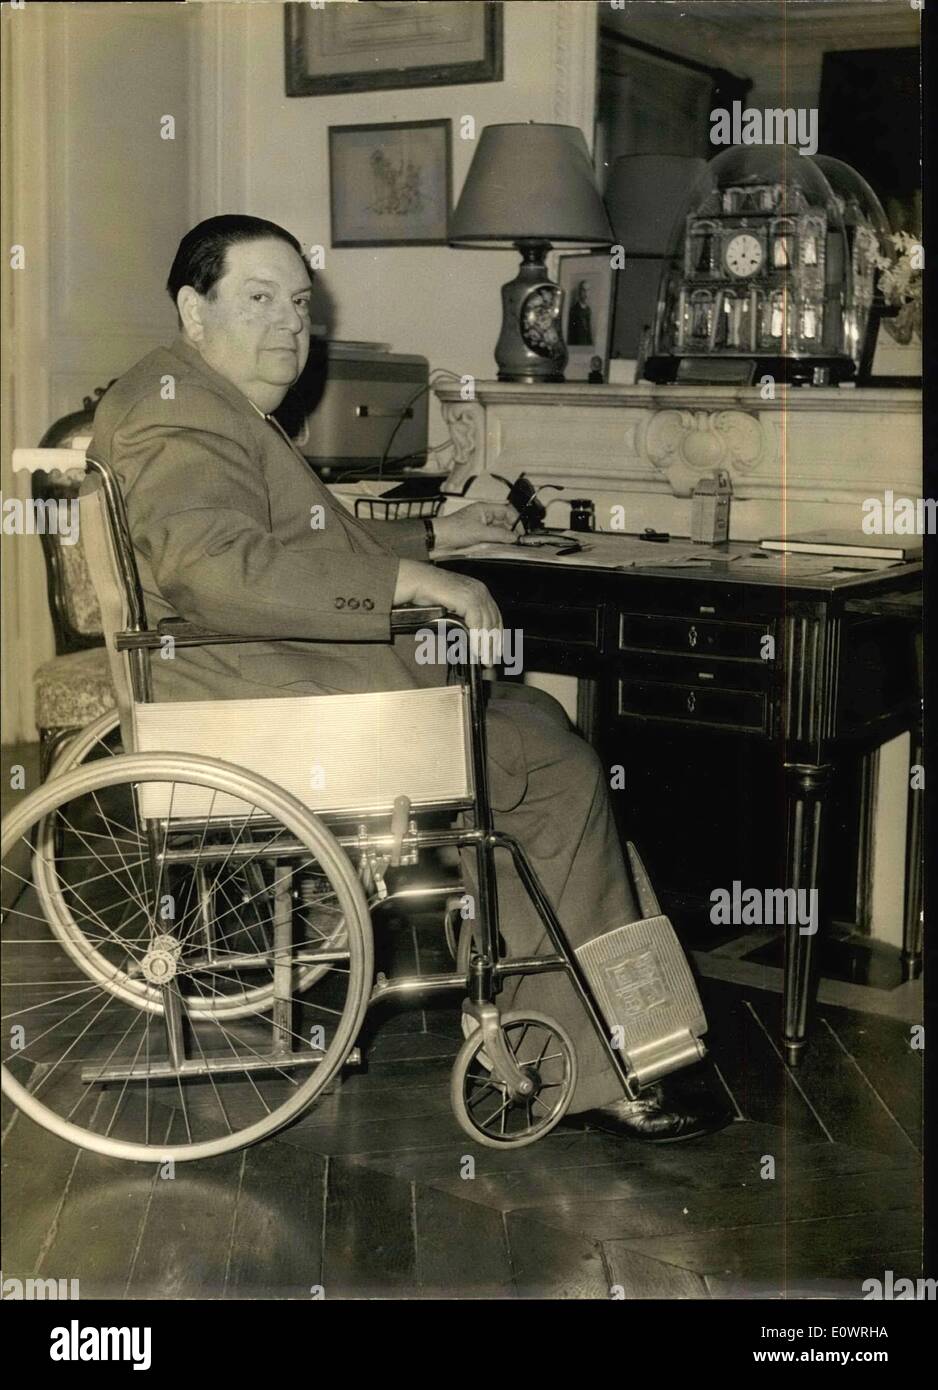 Dec. 02, 1963 - Dapius Milhaud Back In Paris: Returning From The USA Where He Lives Most Of The Year, French Composer Dapius Milhaud Is Back In His Paris Appartment. Photo shows Composer Darius Milhaud Pictured At Home In Paris. Stock Photo